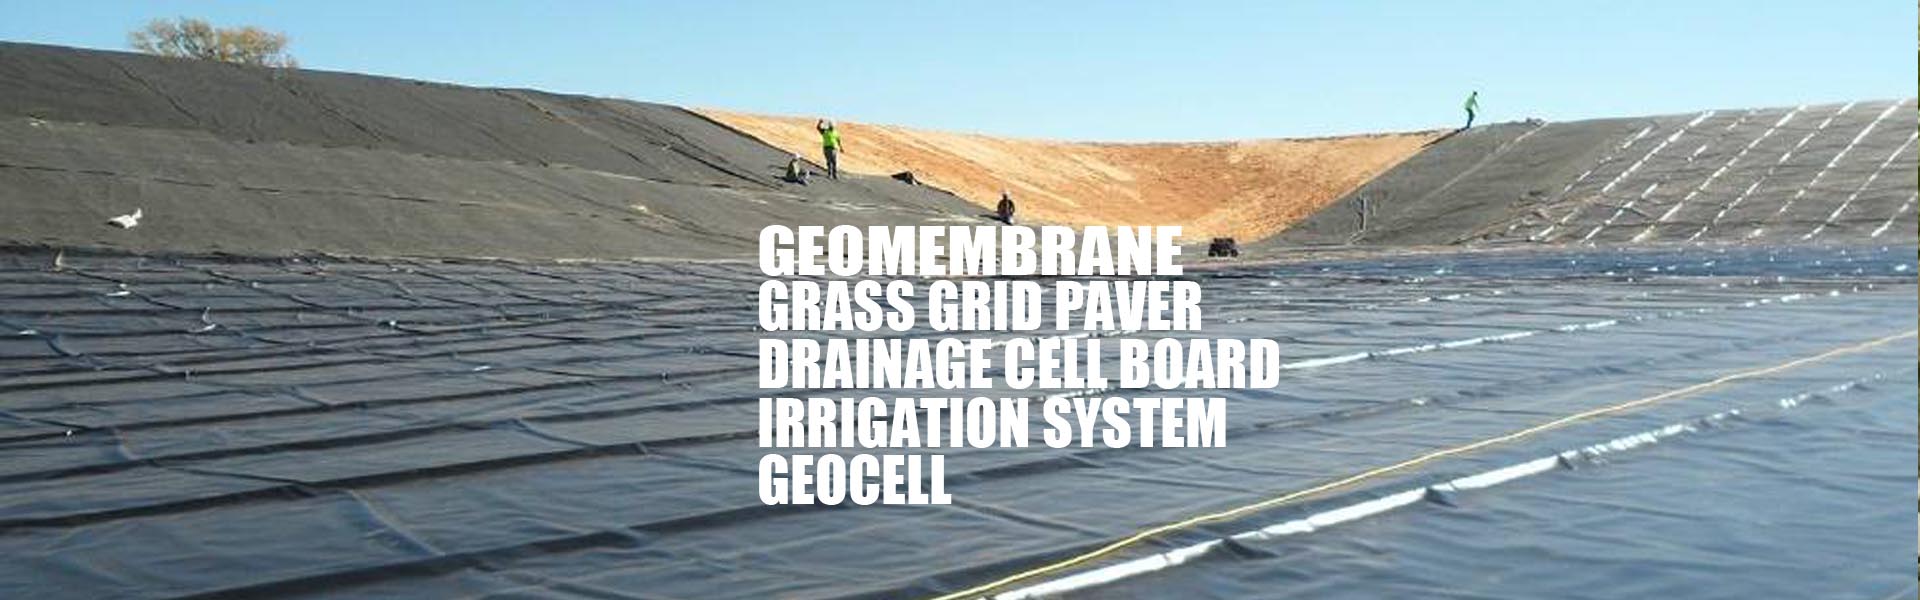 geomembrane,grass grid paver factory,geocell, irrigation system,drainage board factory